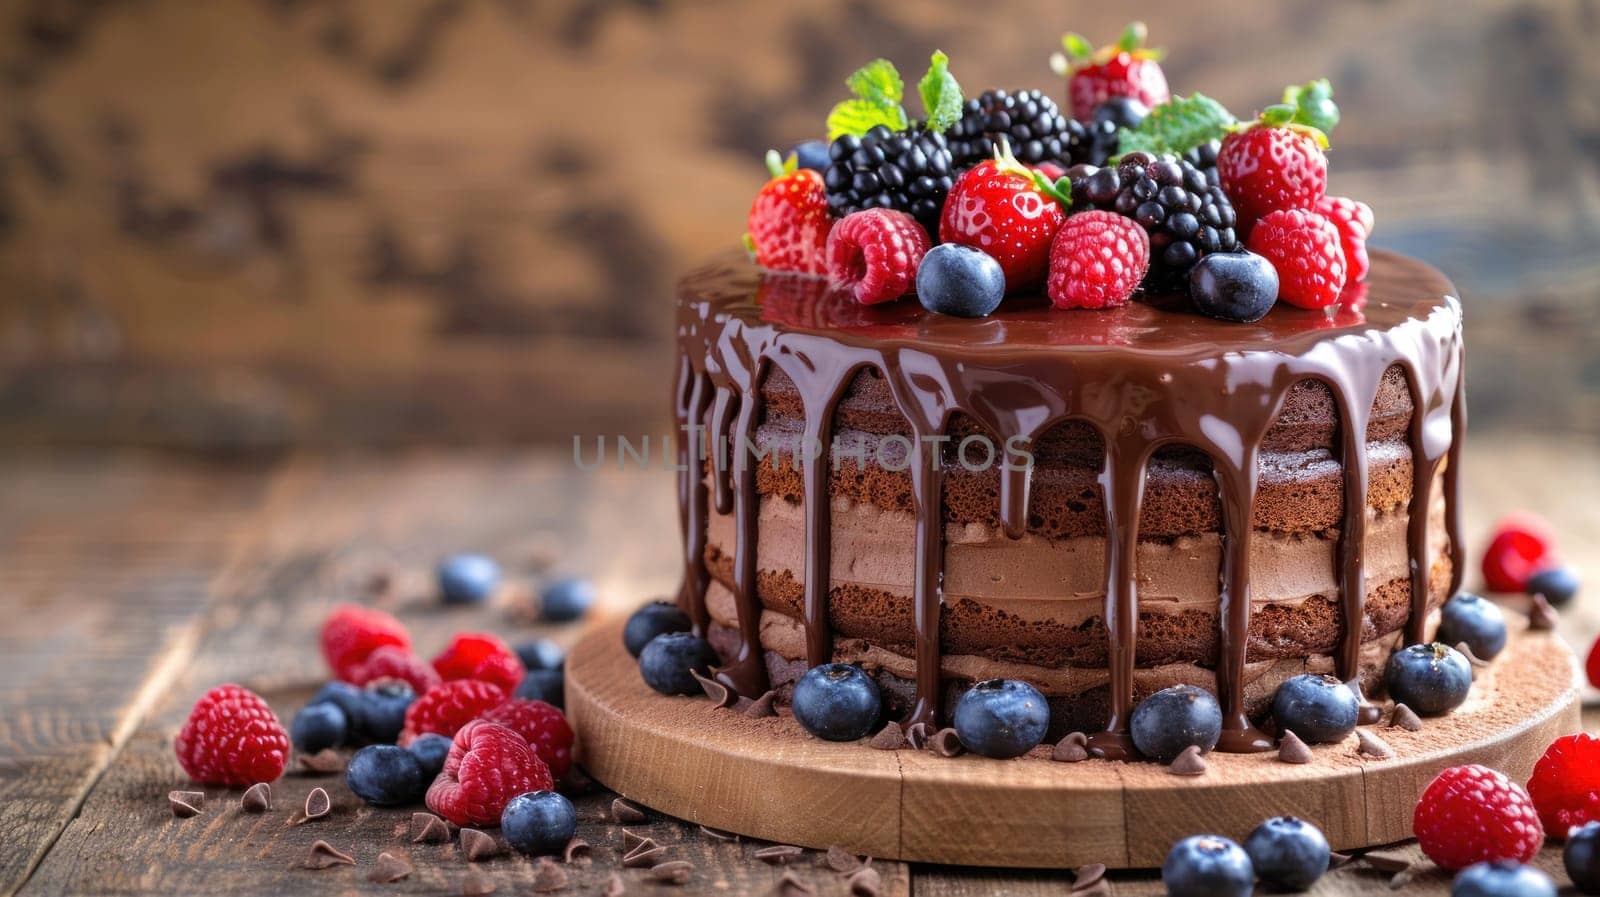 A chocolate cake with blueberries and raspberries on top indulgence for a Chocolate Day banner.